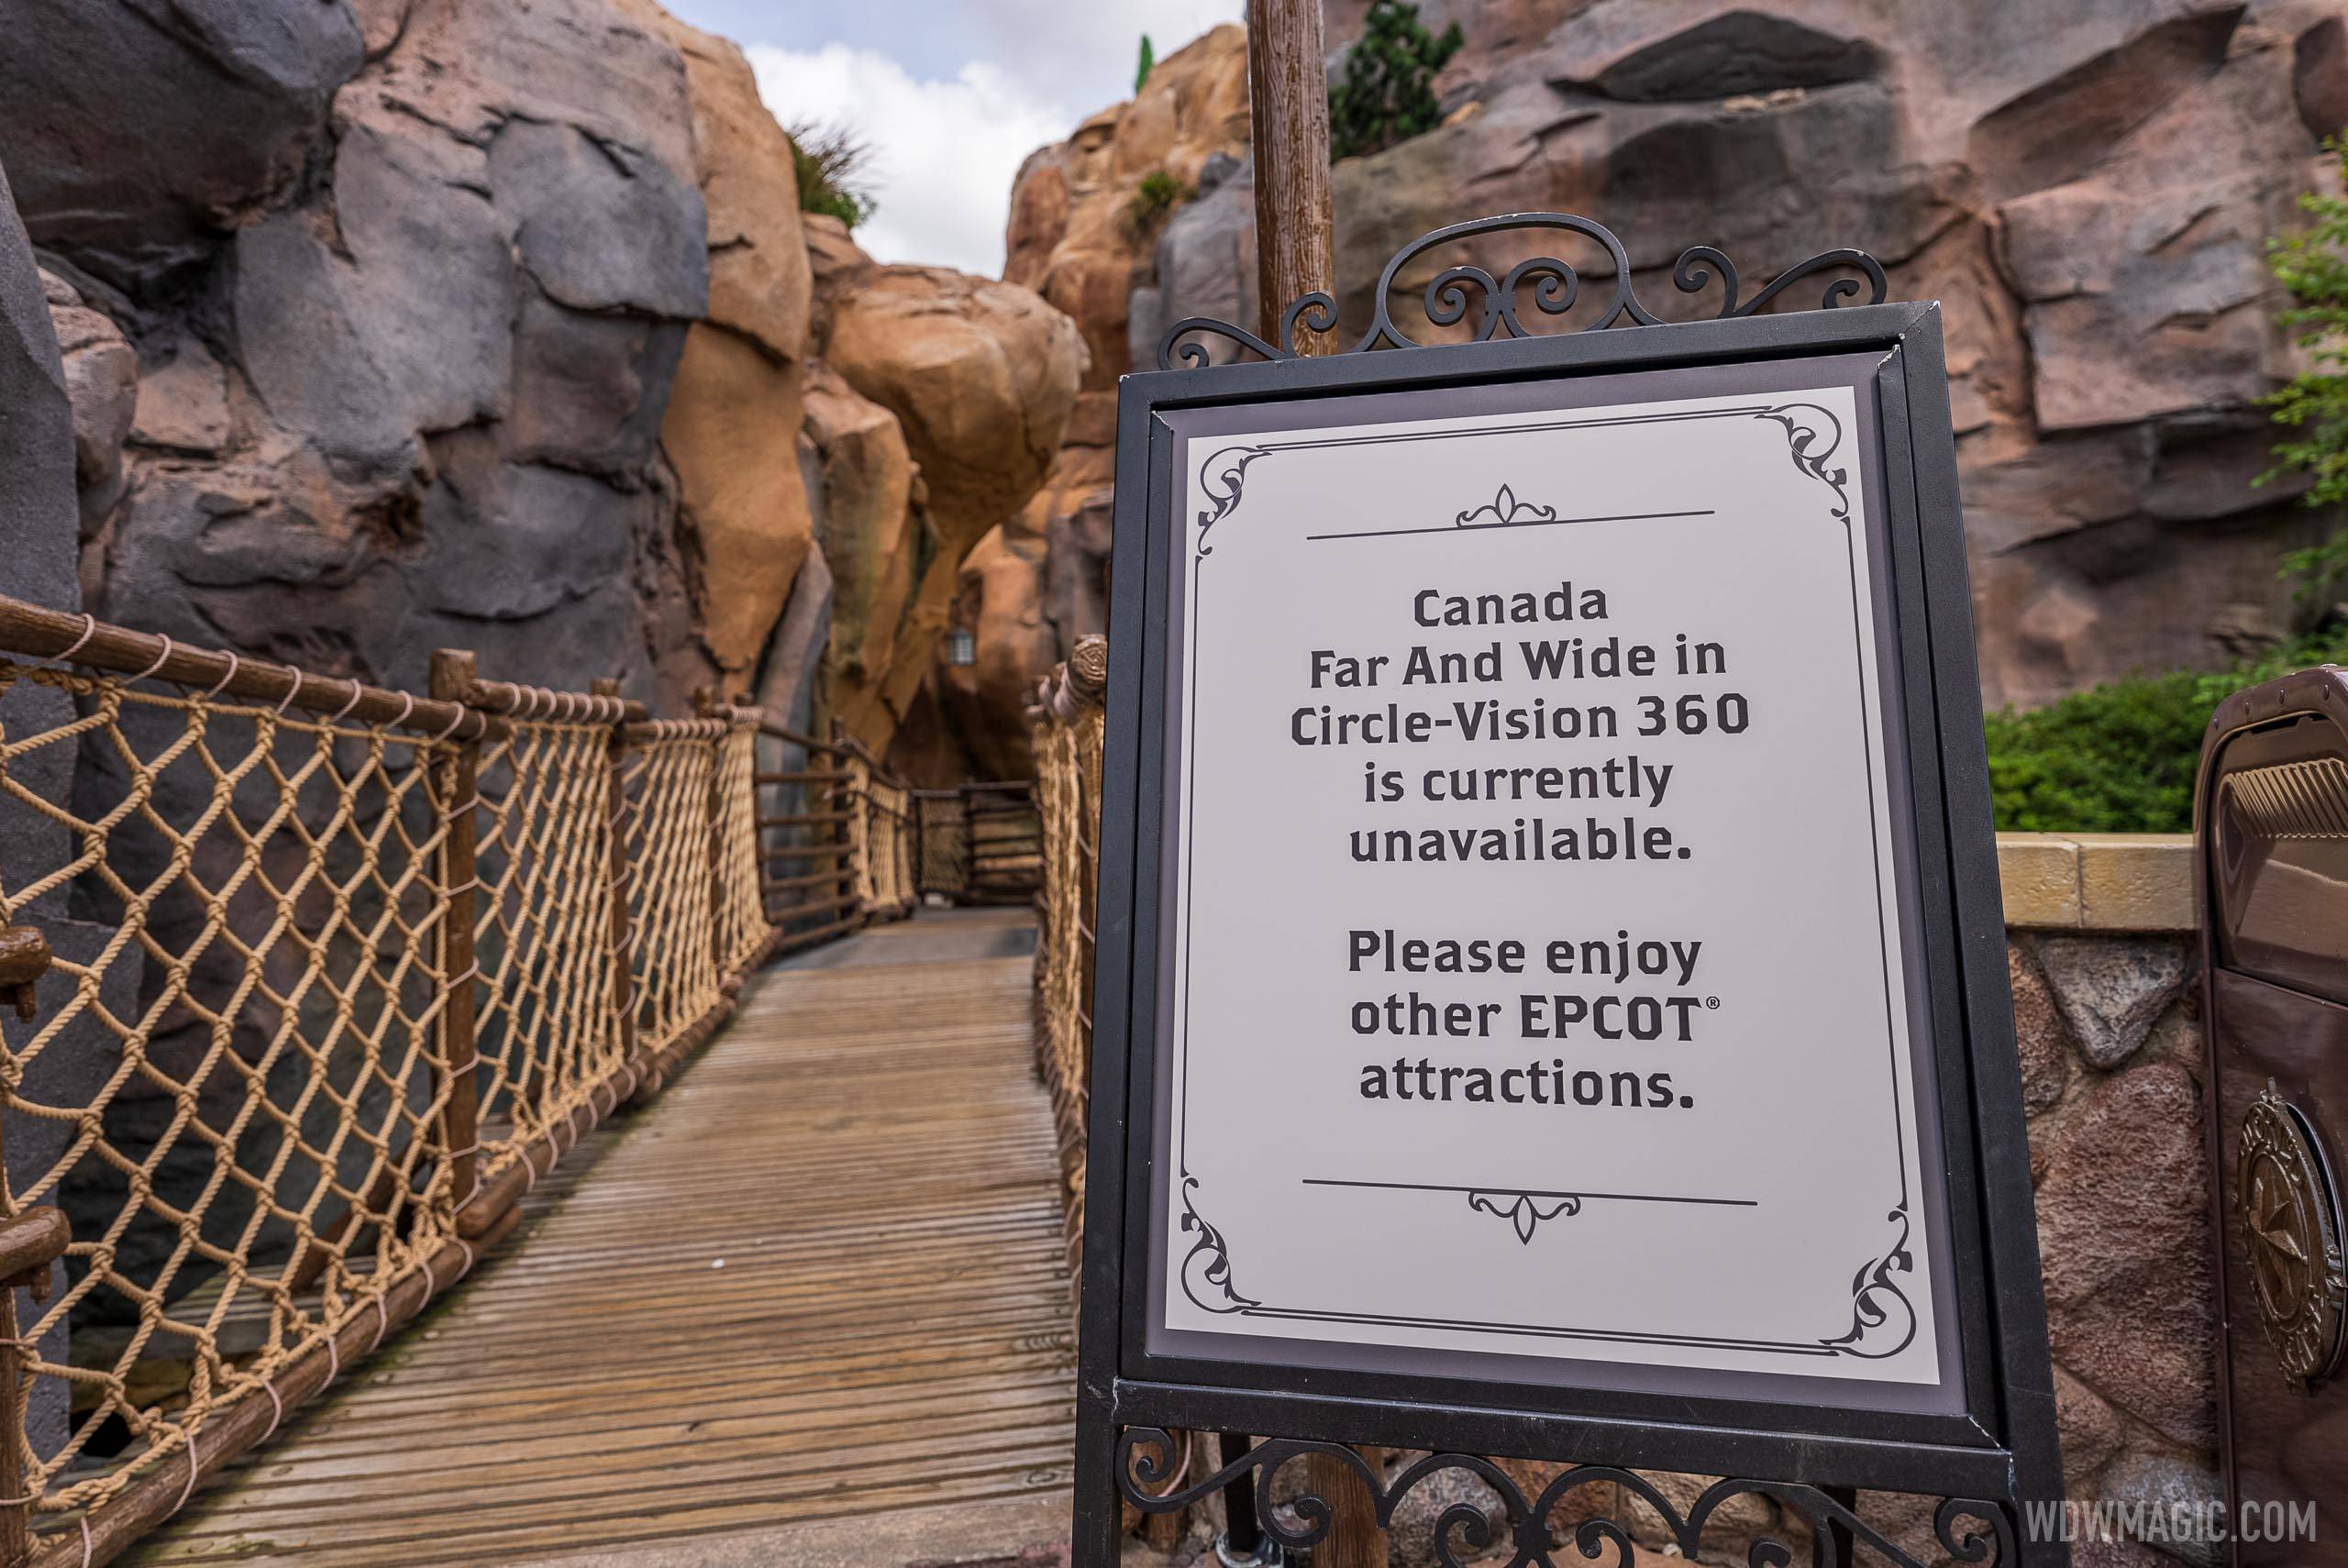 Canada Far and Wide at EPCOT will be closed beginning June 27 2022